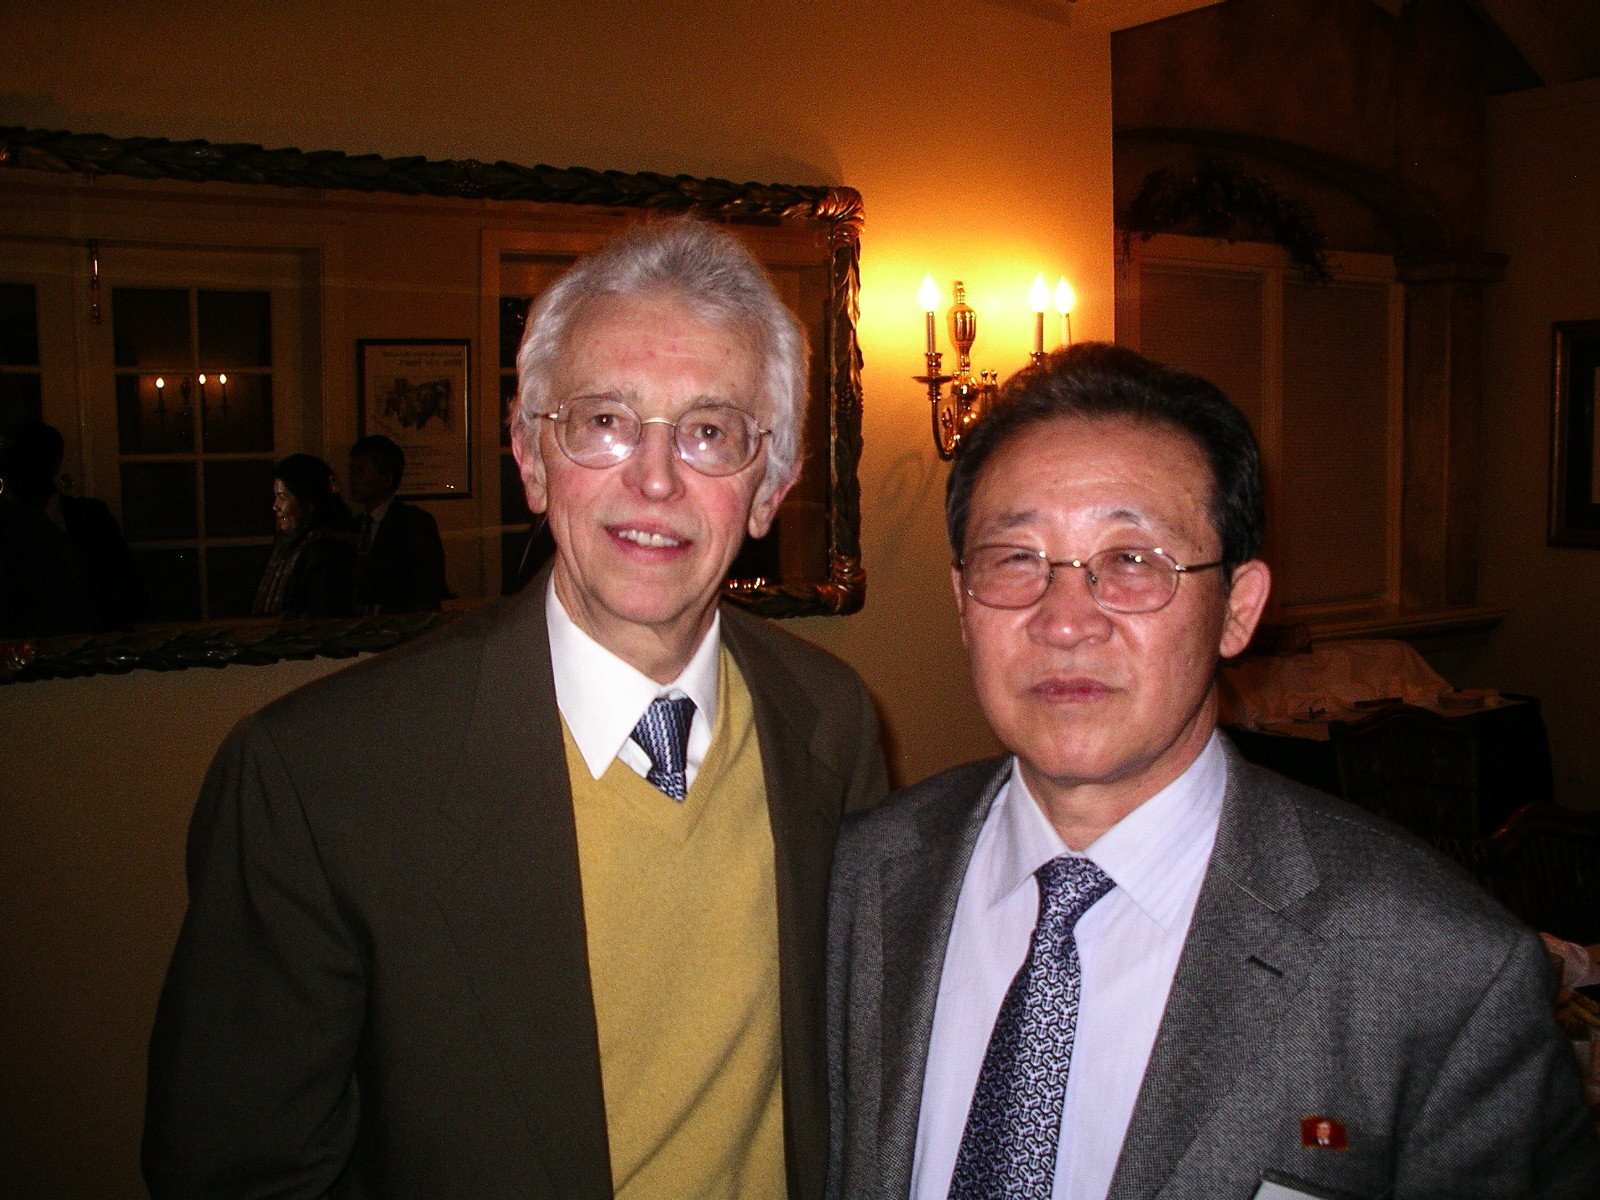 Man in mustard color vest and man in gray business suit both wearing glasses pose for a photo in a restaurant room